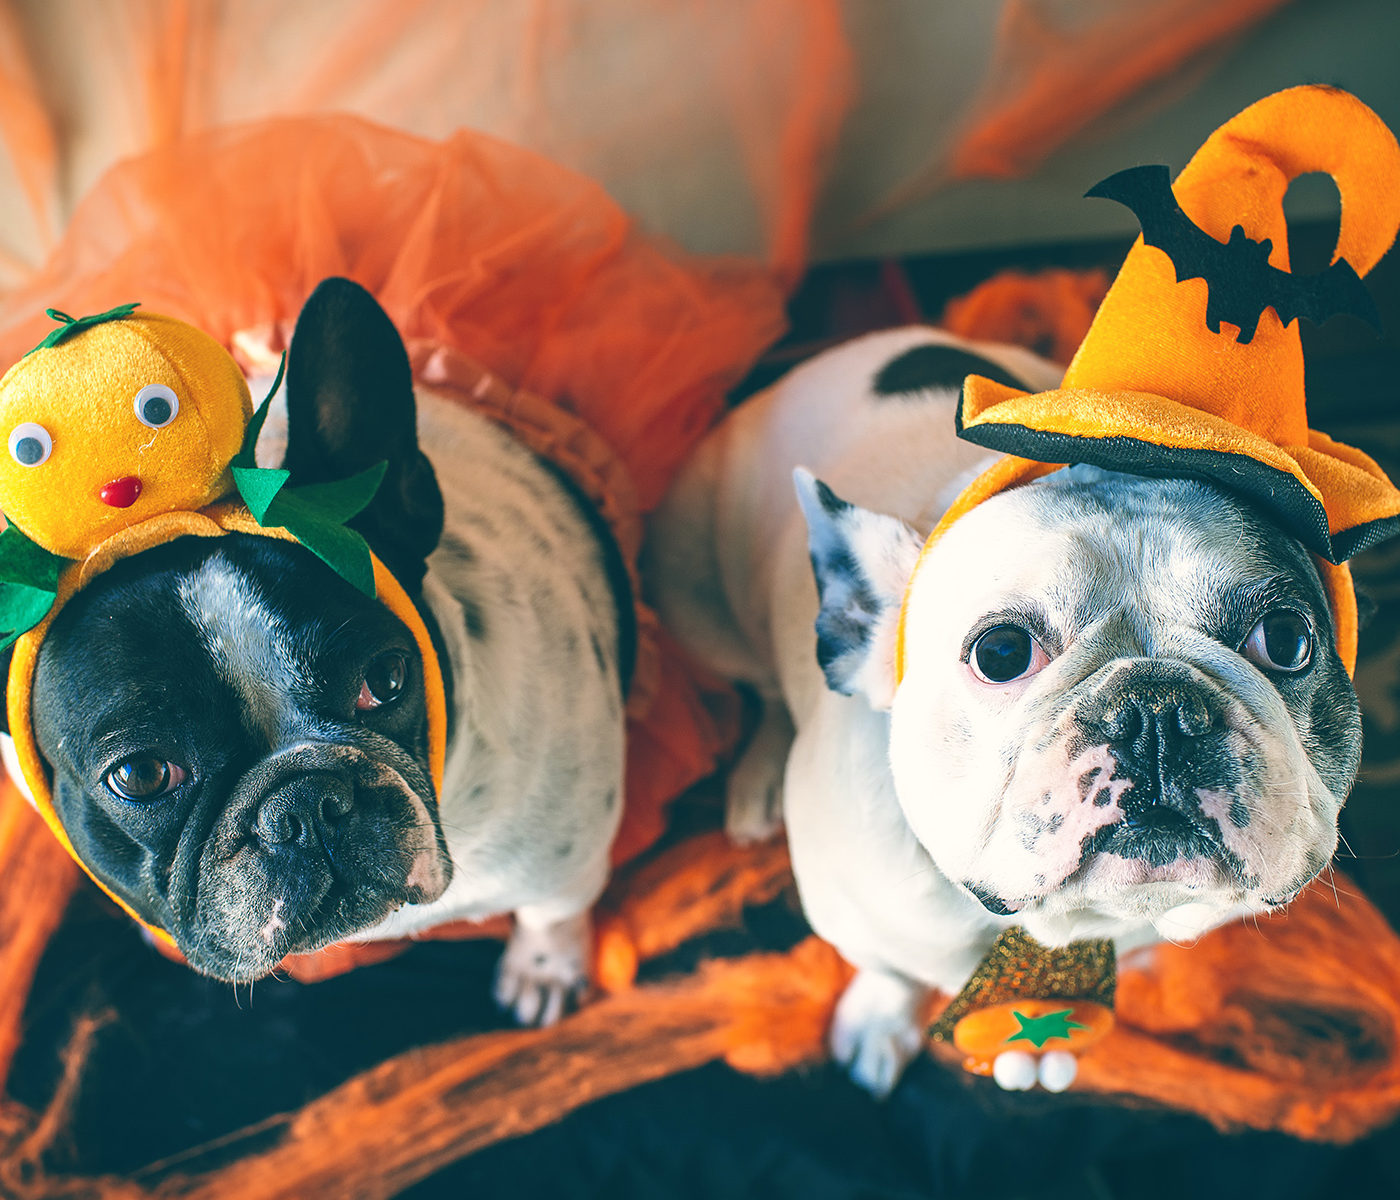 Halloween safety for pets